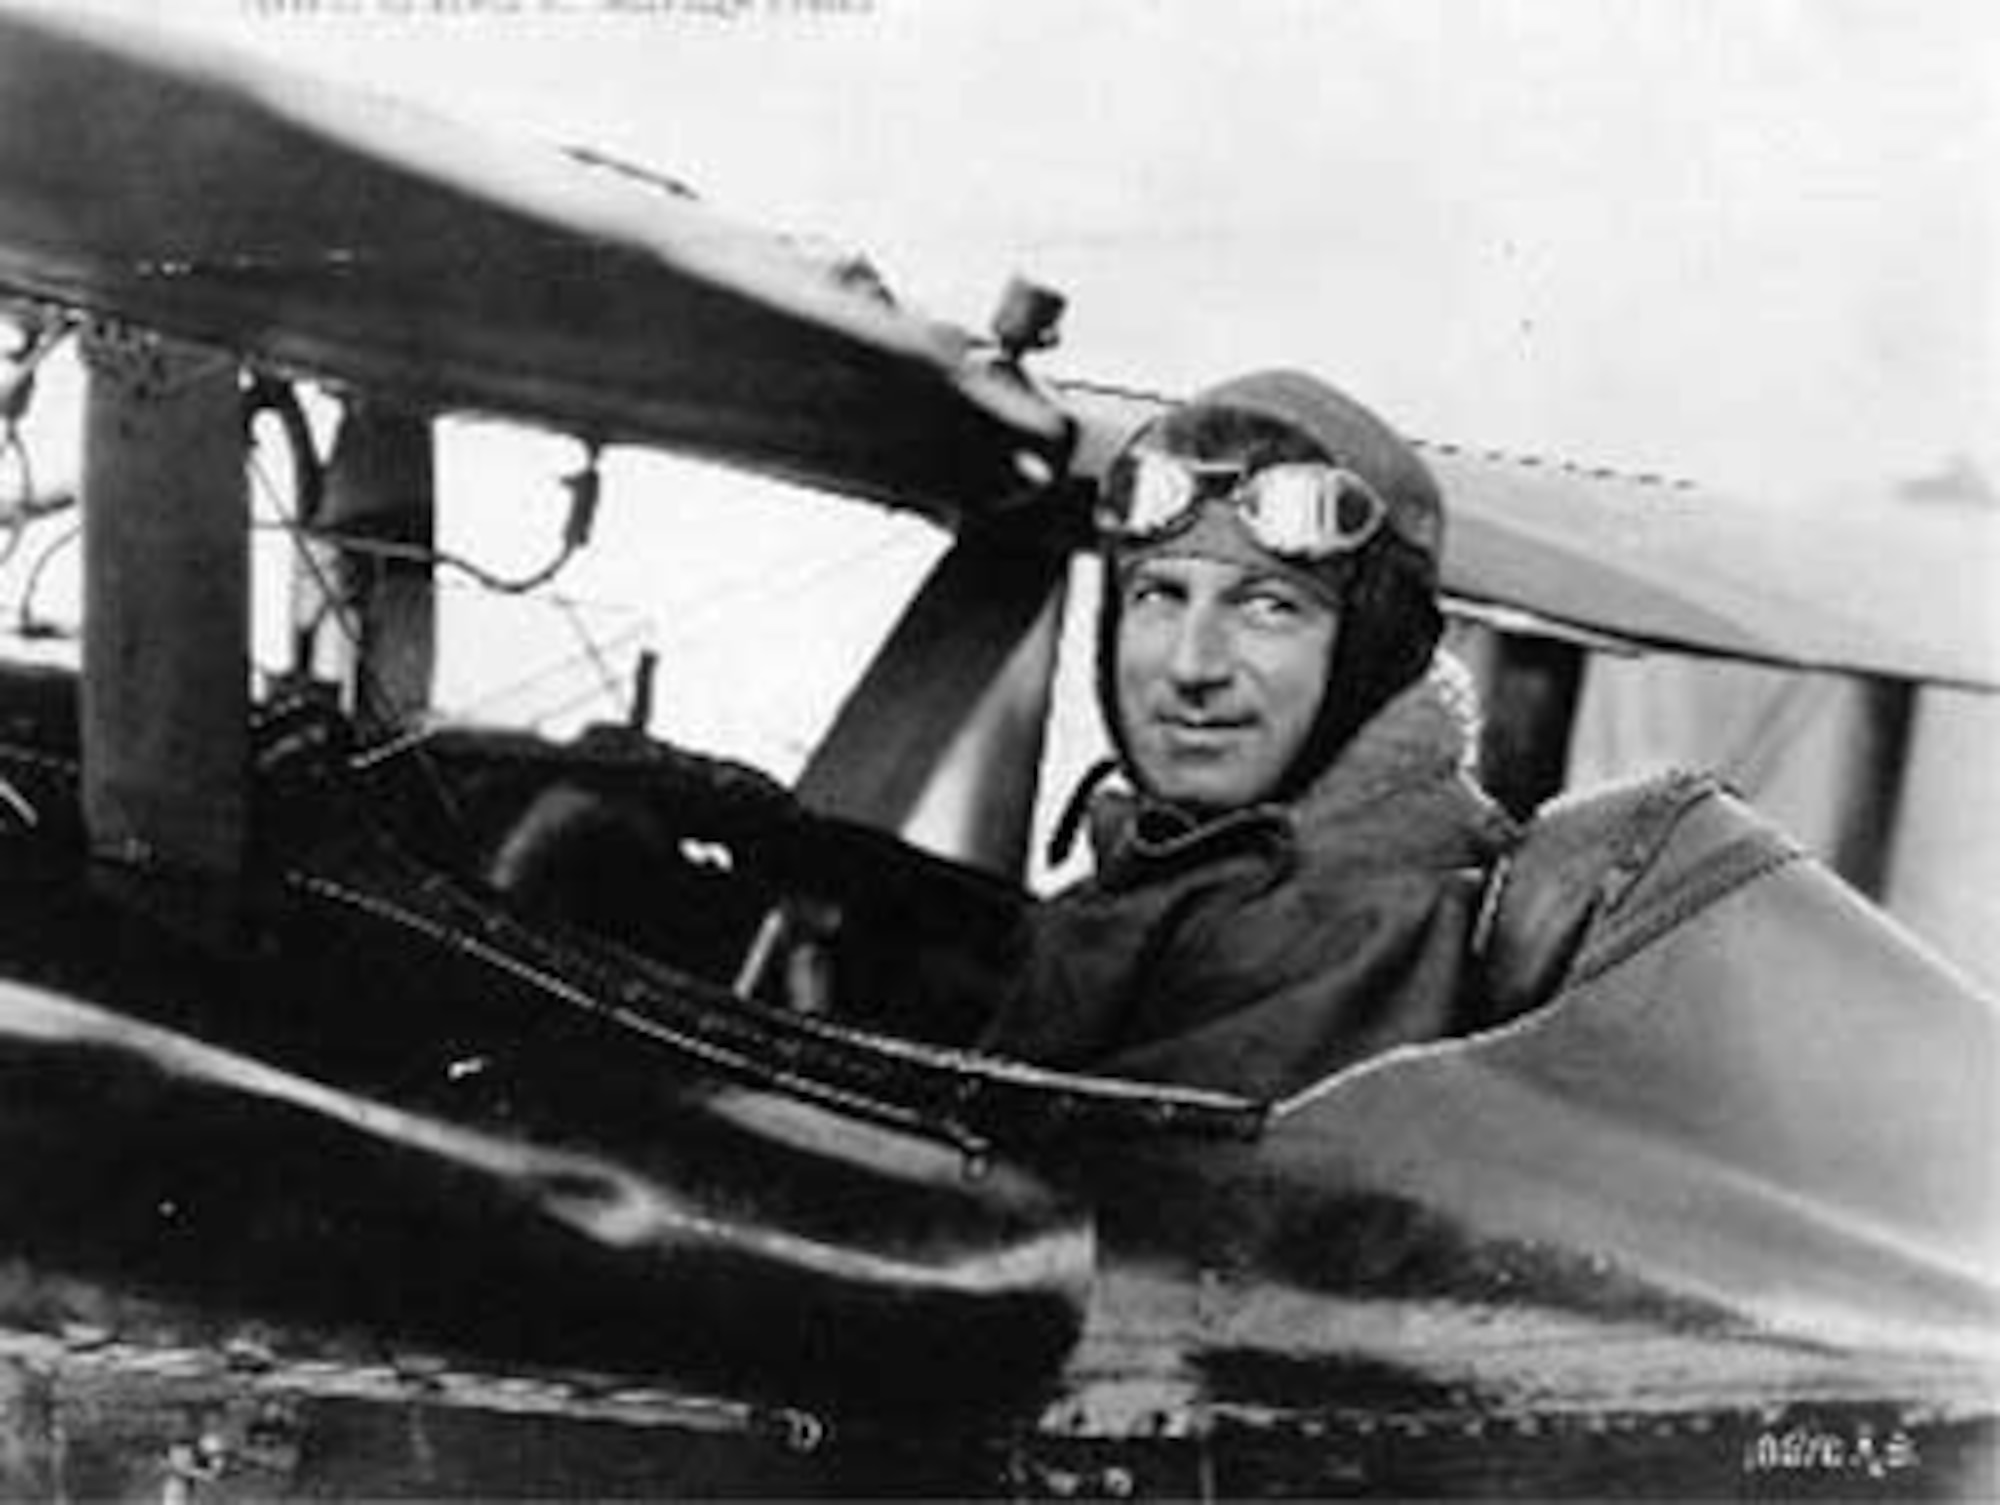 Then-Brig. Gen. William Mitchell sits in a Curtiss R-6 biplane at Selfridge Field on or about Oct. 18, 1922, while participating in the National Airplane Races at Selfridge. During the event, Mitchell set an "official" air speed record of 224.05 miles per hour, while flying a course over Lake St. Clair. Several days earlier, Lt. Russell L. Maughan had flown at 248.5 miles per hour, but the official observers had not yet arrived at Selfridge to verify that feat. 